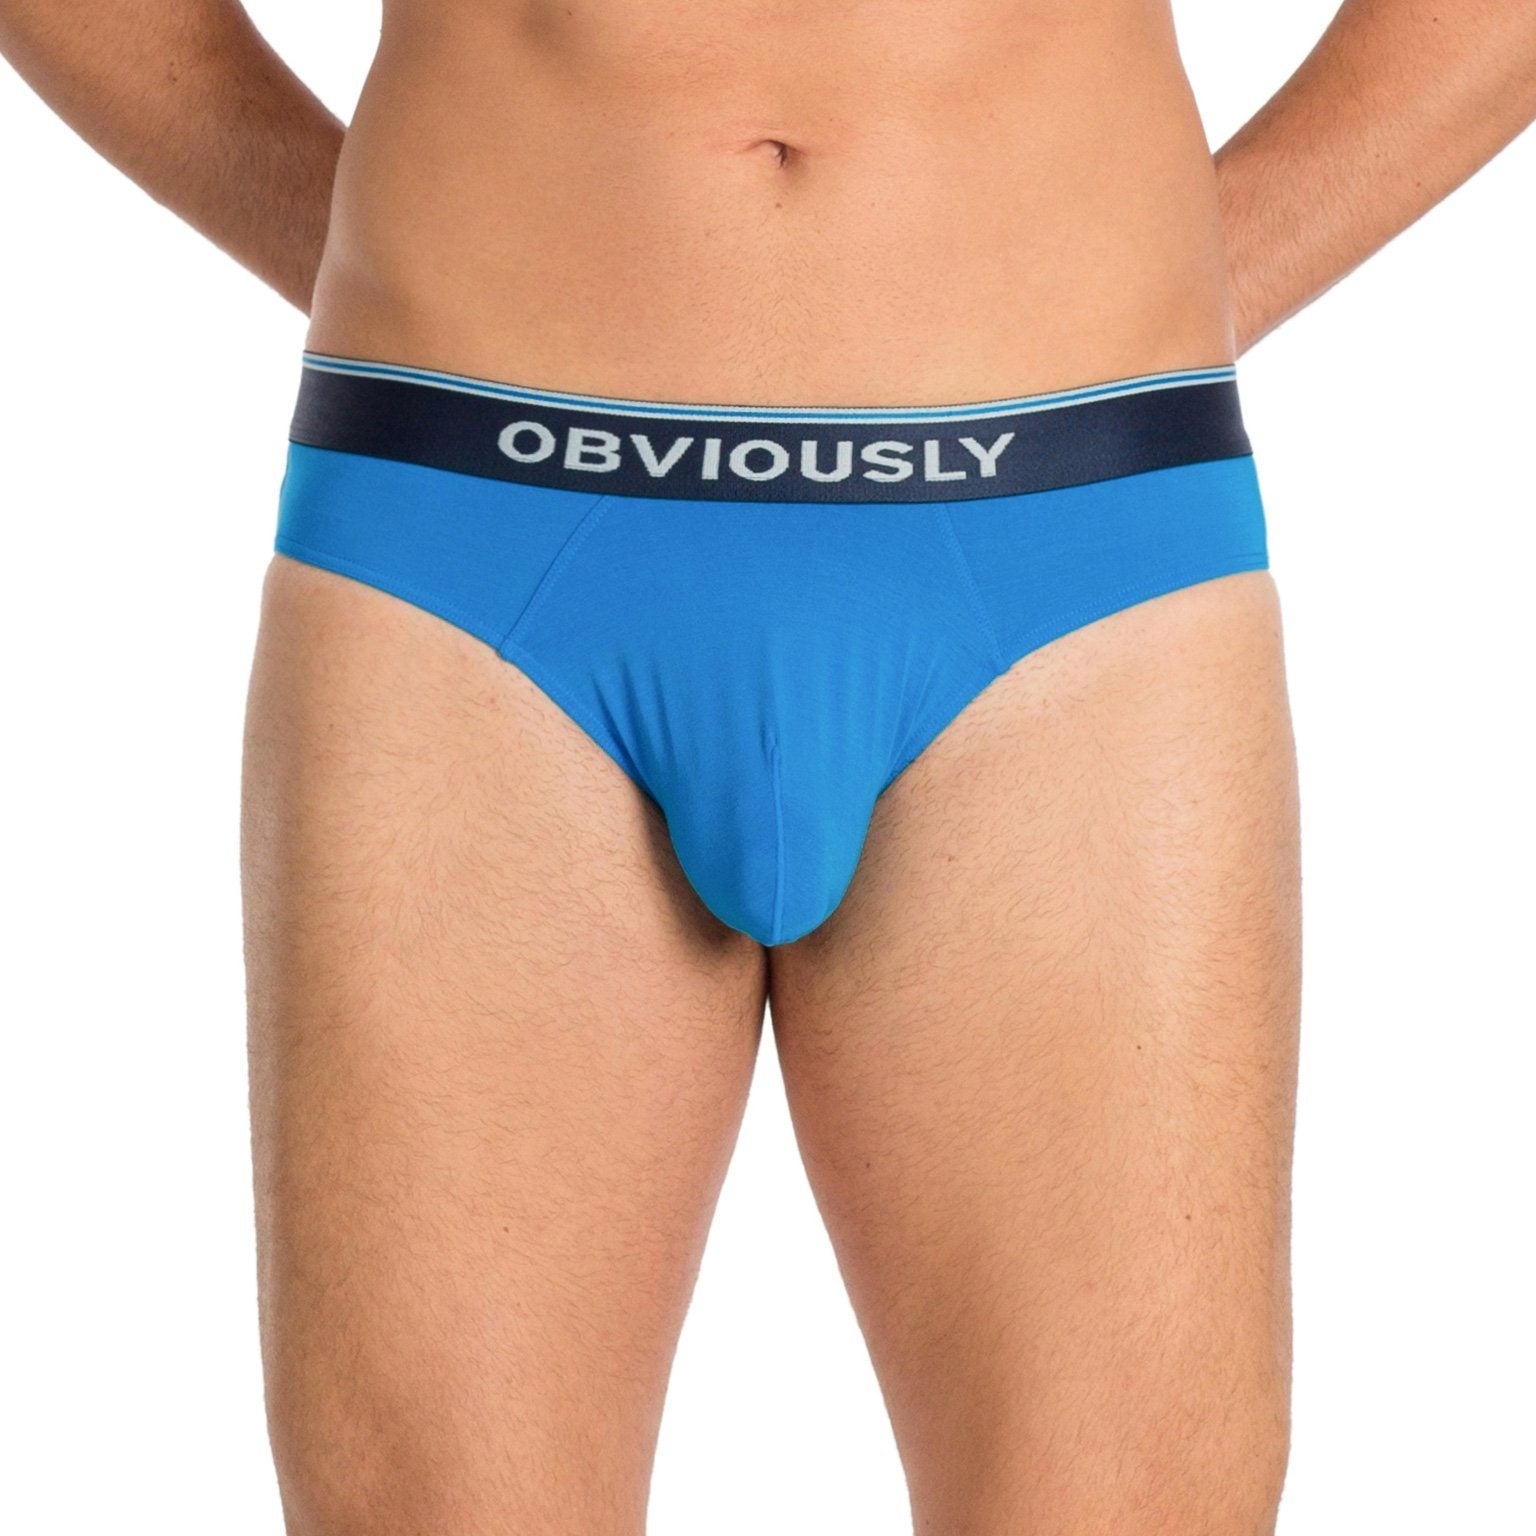 Obviously Apparel Downtown Collection - AnatoMAX Brief